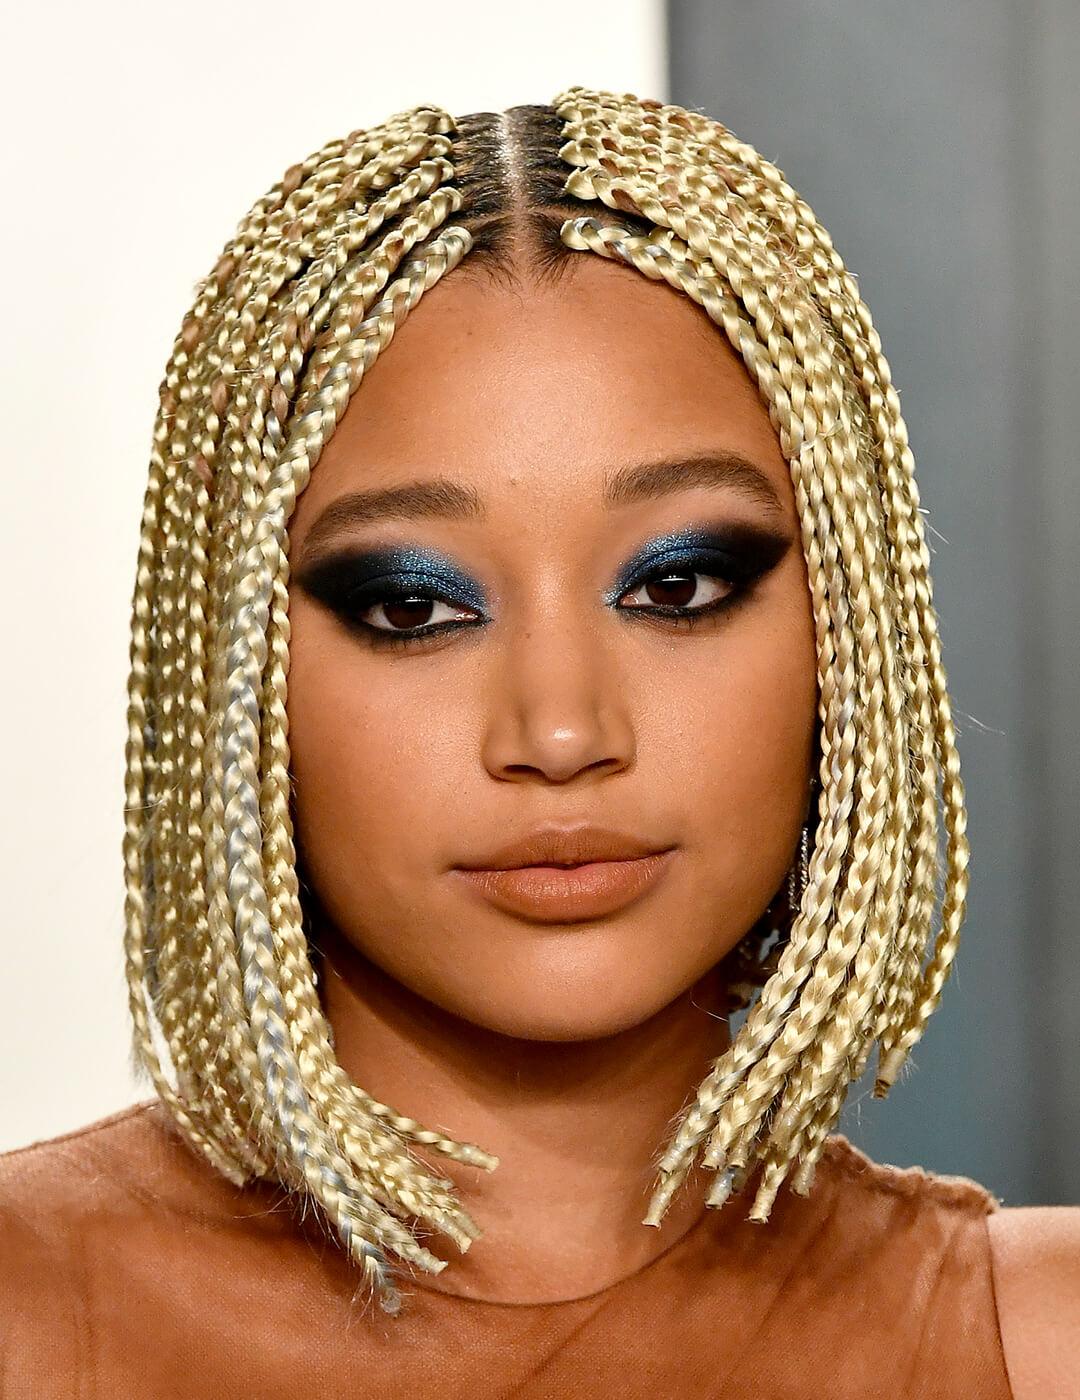 A photo of Amandla Stenberg with gold-colored braided hair and defined smokey eyeshadow